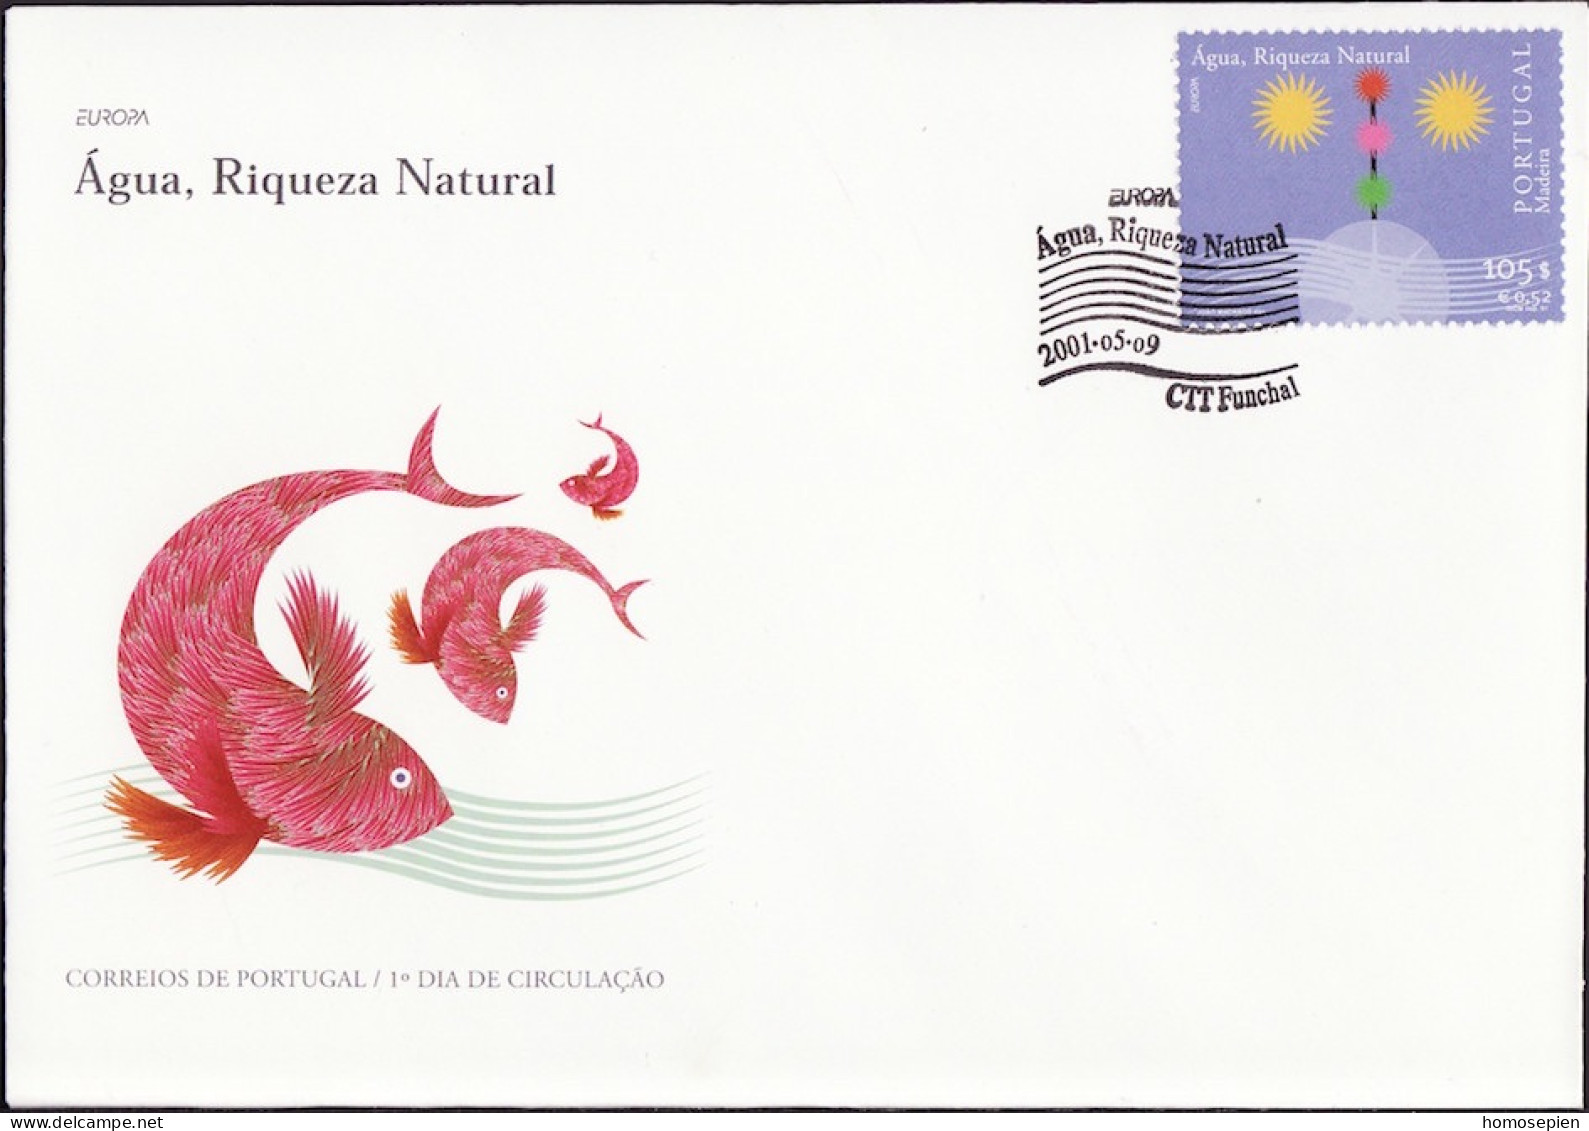 Europa CEPT 2001 Madère - Madeira - Portugal FDC Y&T N°219 - Michel N°212 - 0,52€ EUROPA - 2001